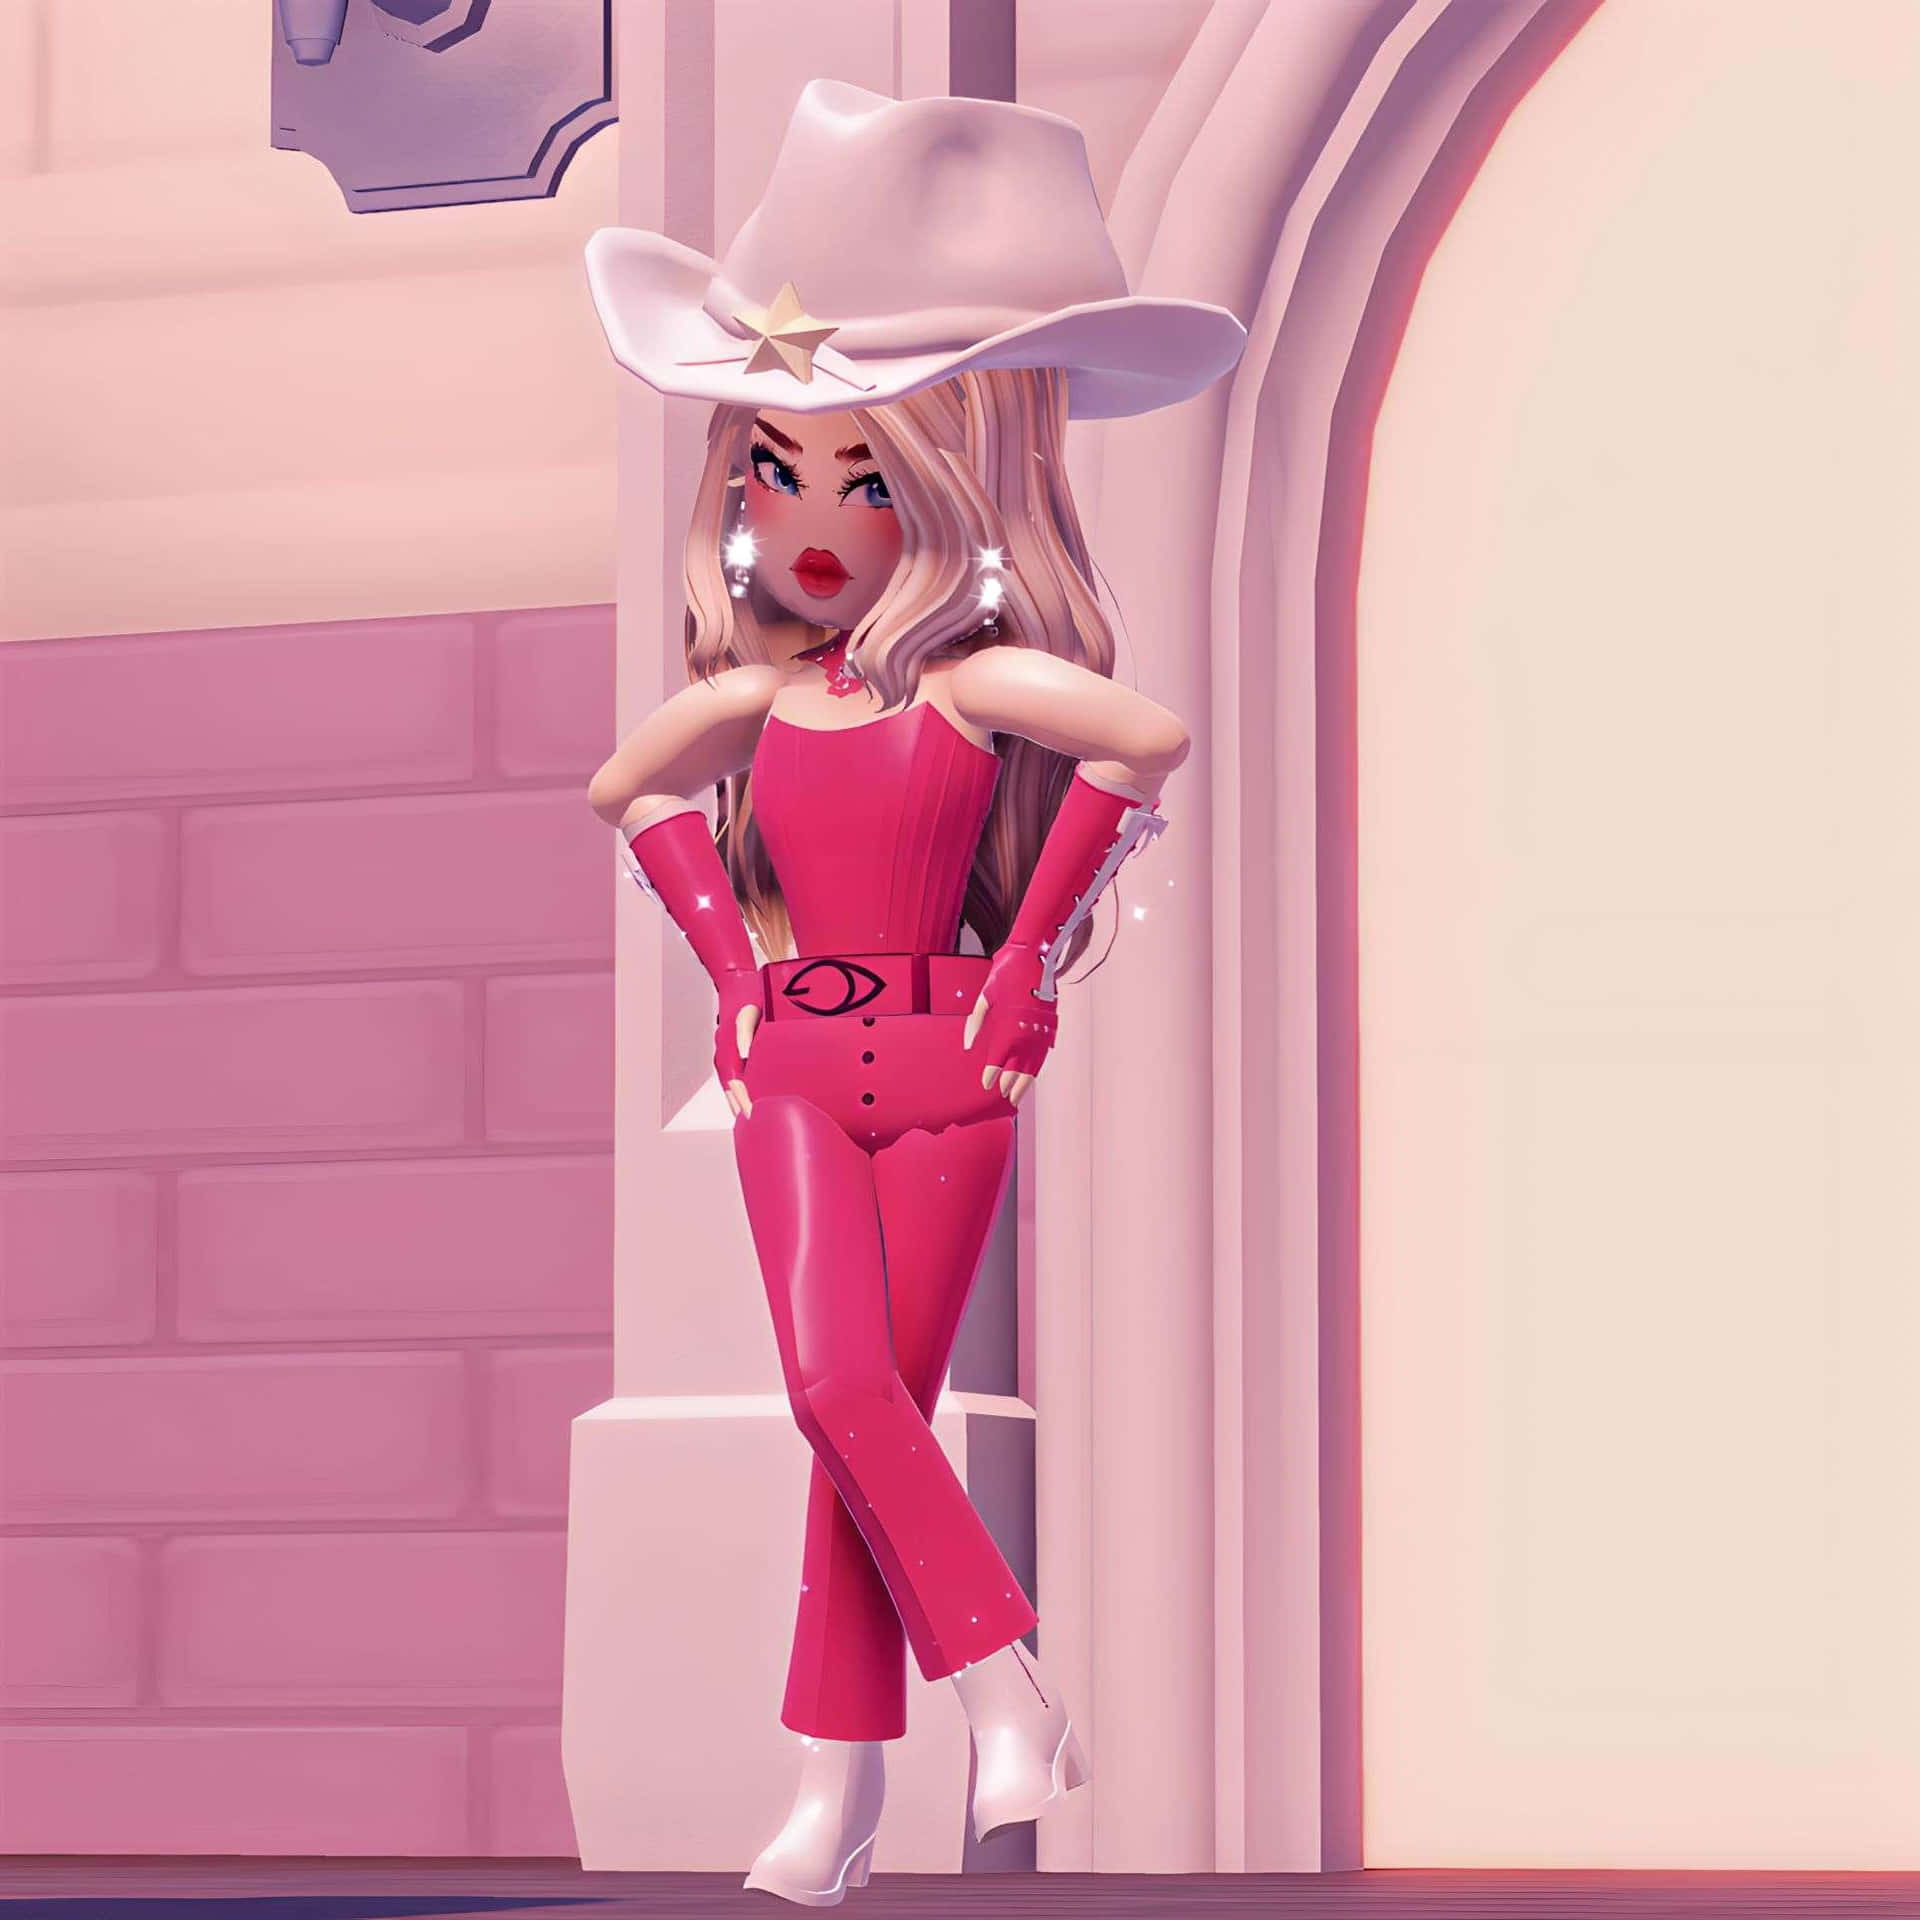 Pink Cowgirl Aesthetic Pose Wallpaper